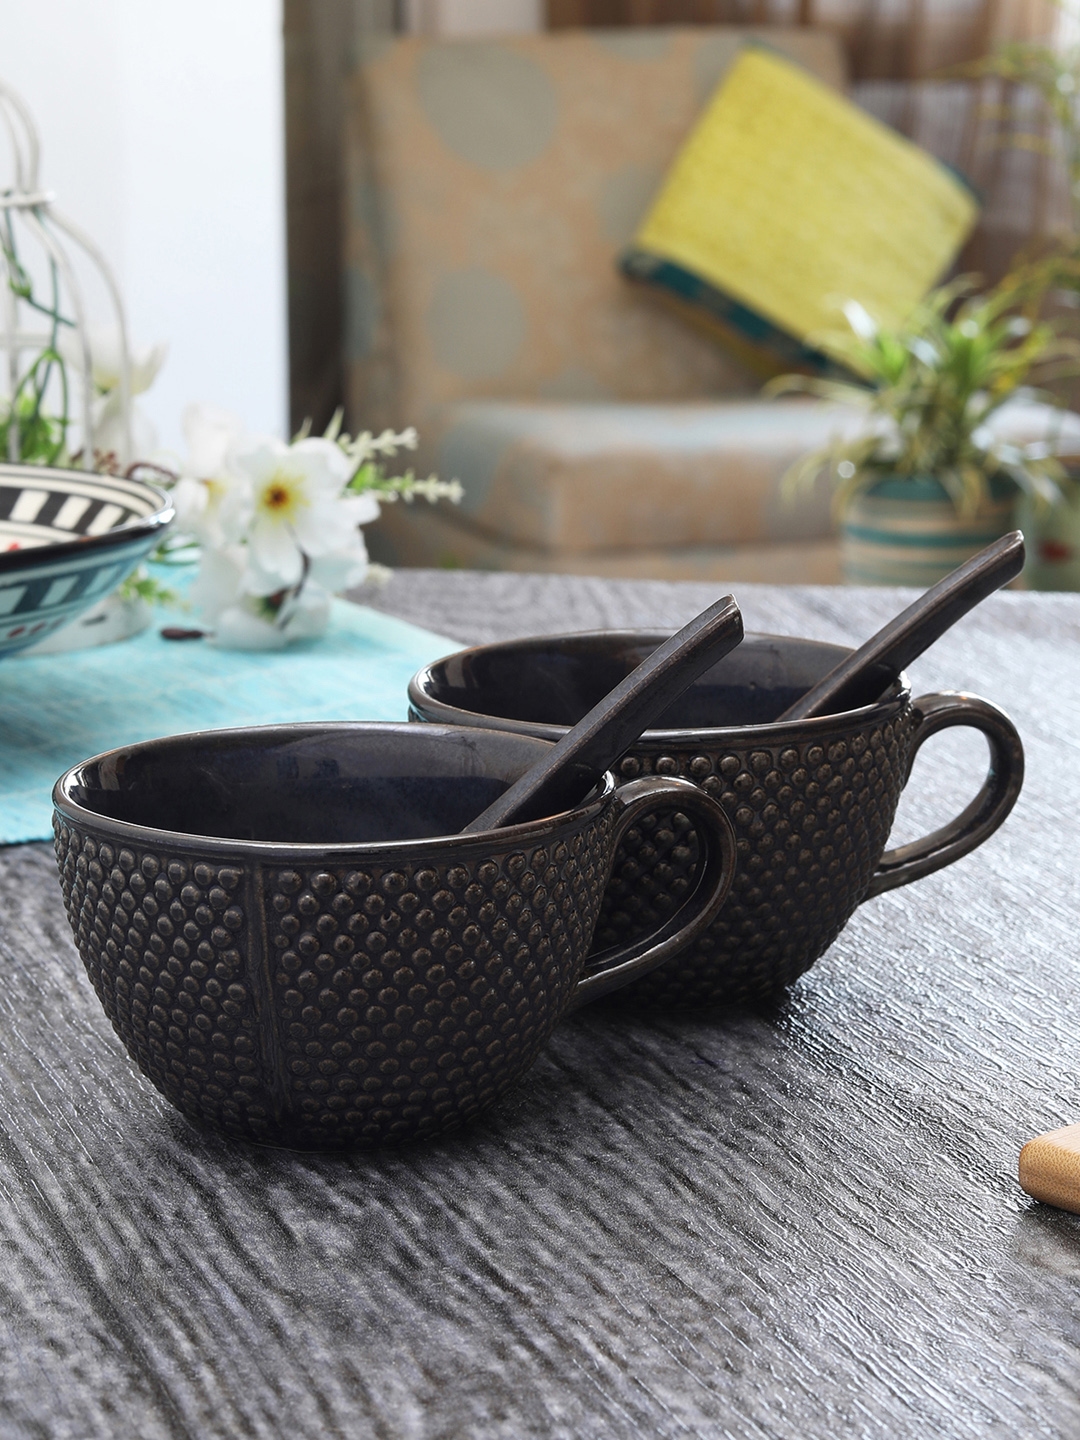 MIAH Decor Set of 2 Black Textured Ceramic Soup Bowls with Spoon